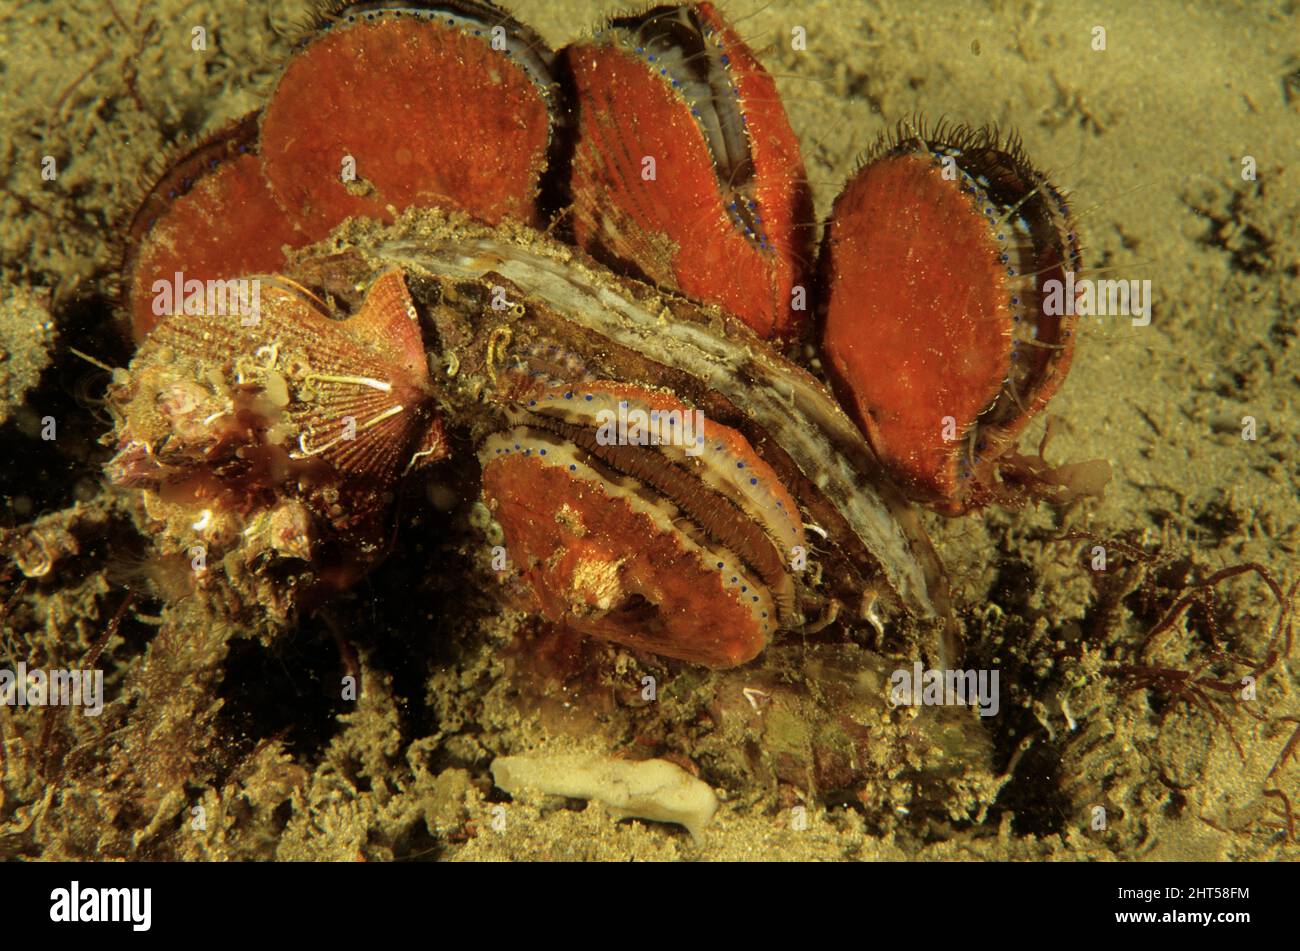 Doughboy scallops  (Mimachlamys asperrima),  covered in orange commensal sponge, attached to a larger King scallop (Pecten meridionalis).  Jervis Bay, Stock Photo